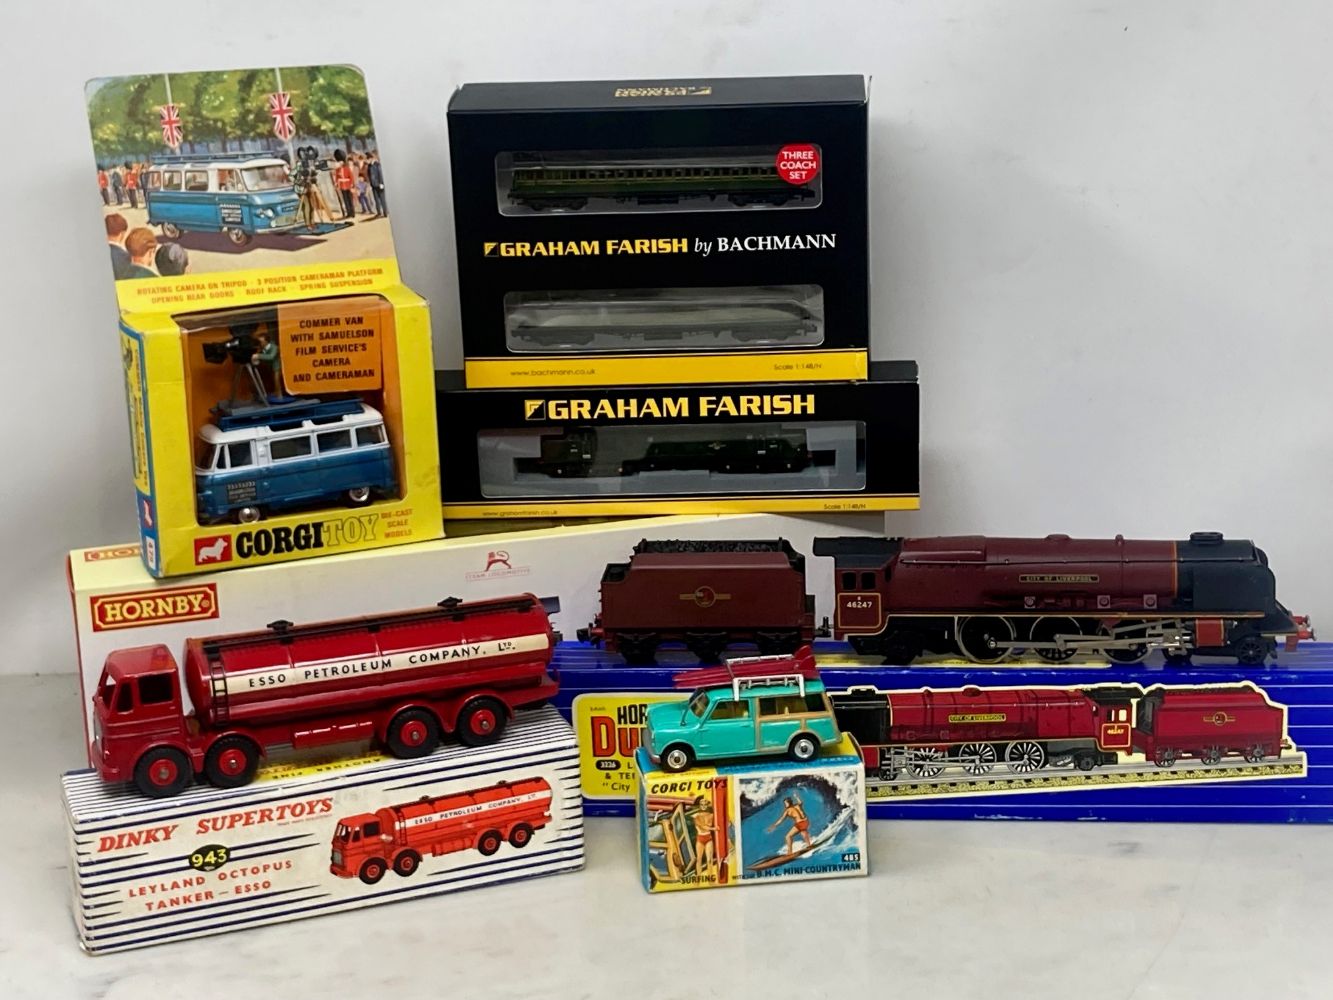 Sale of Model Railway, Diecast Models, Model assembly Kits, Tinplate, Dolls, and Teddy Bears